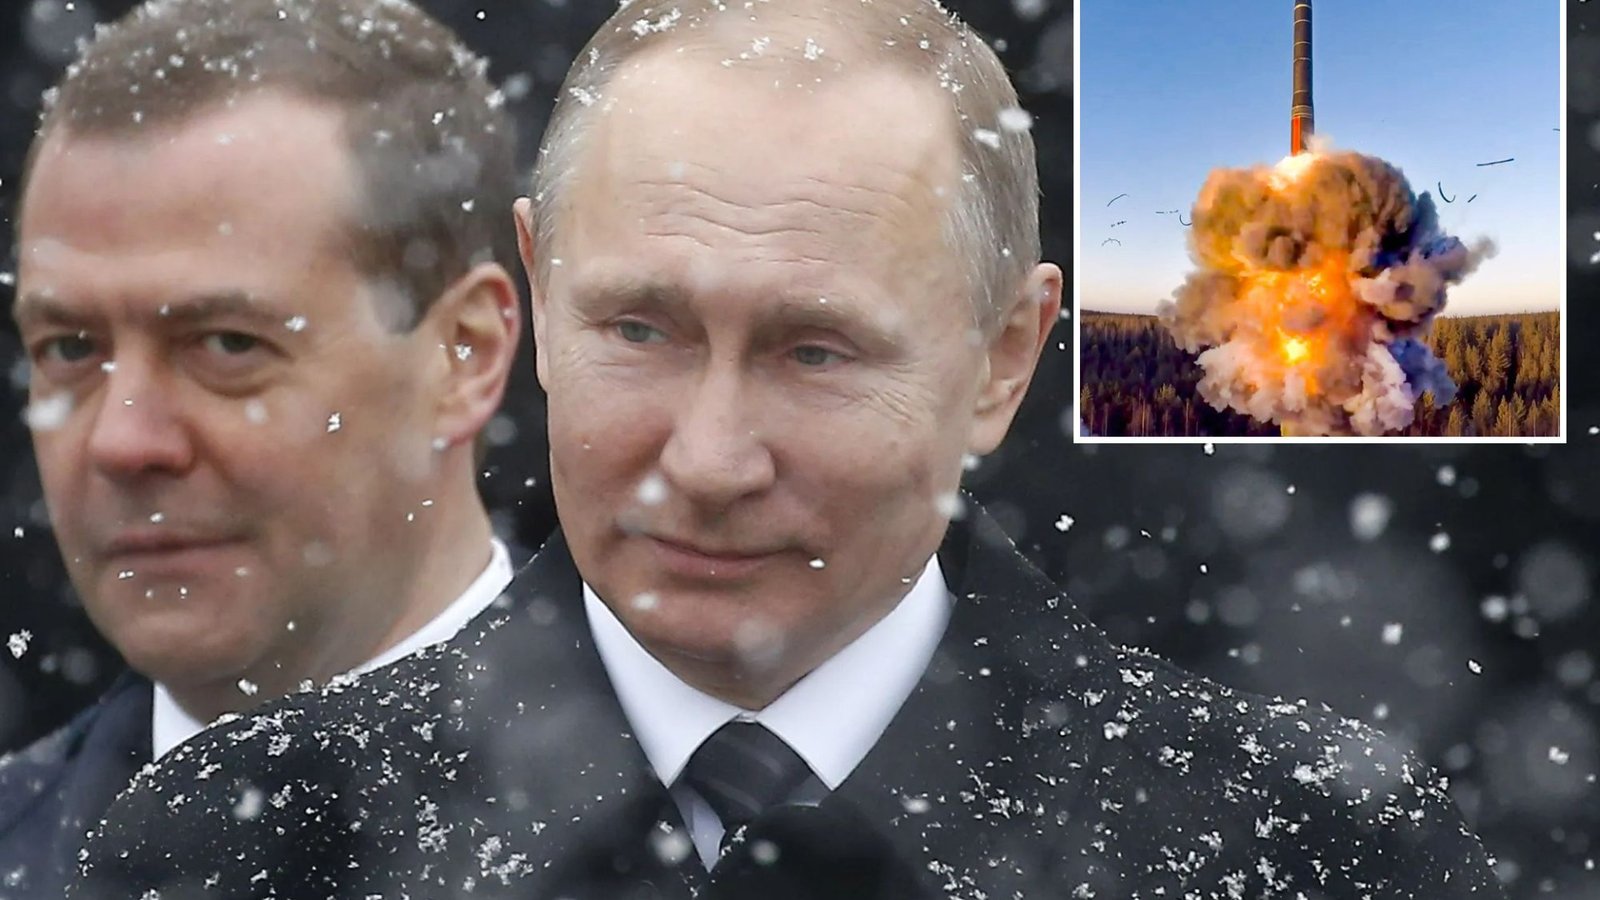 Putin’s top crony Dmitry Medvedev vows Russia will ‘wipe its enemies off the face of the Earth’ in chilling WW3 threat